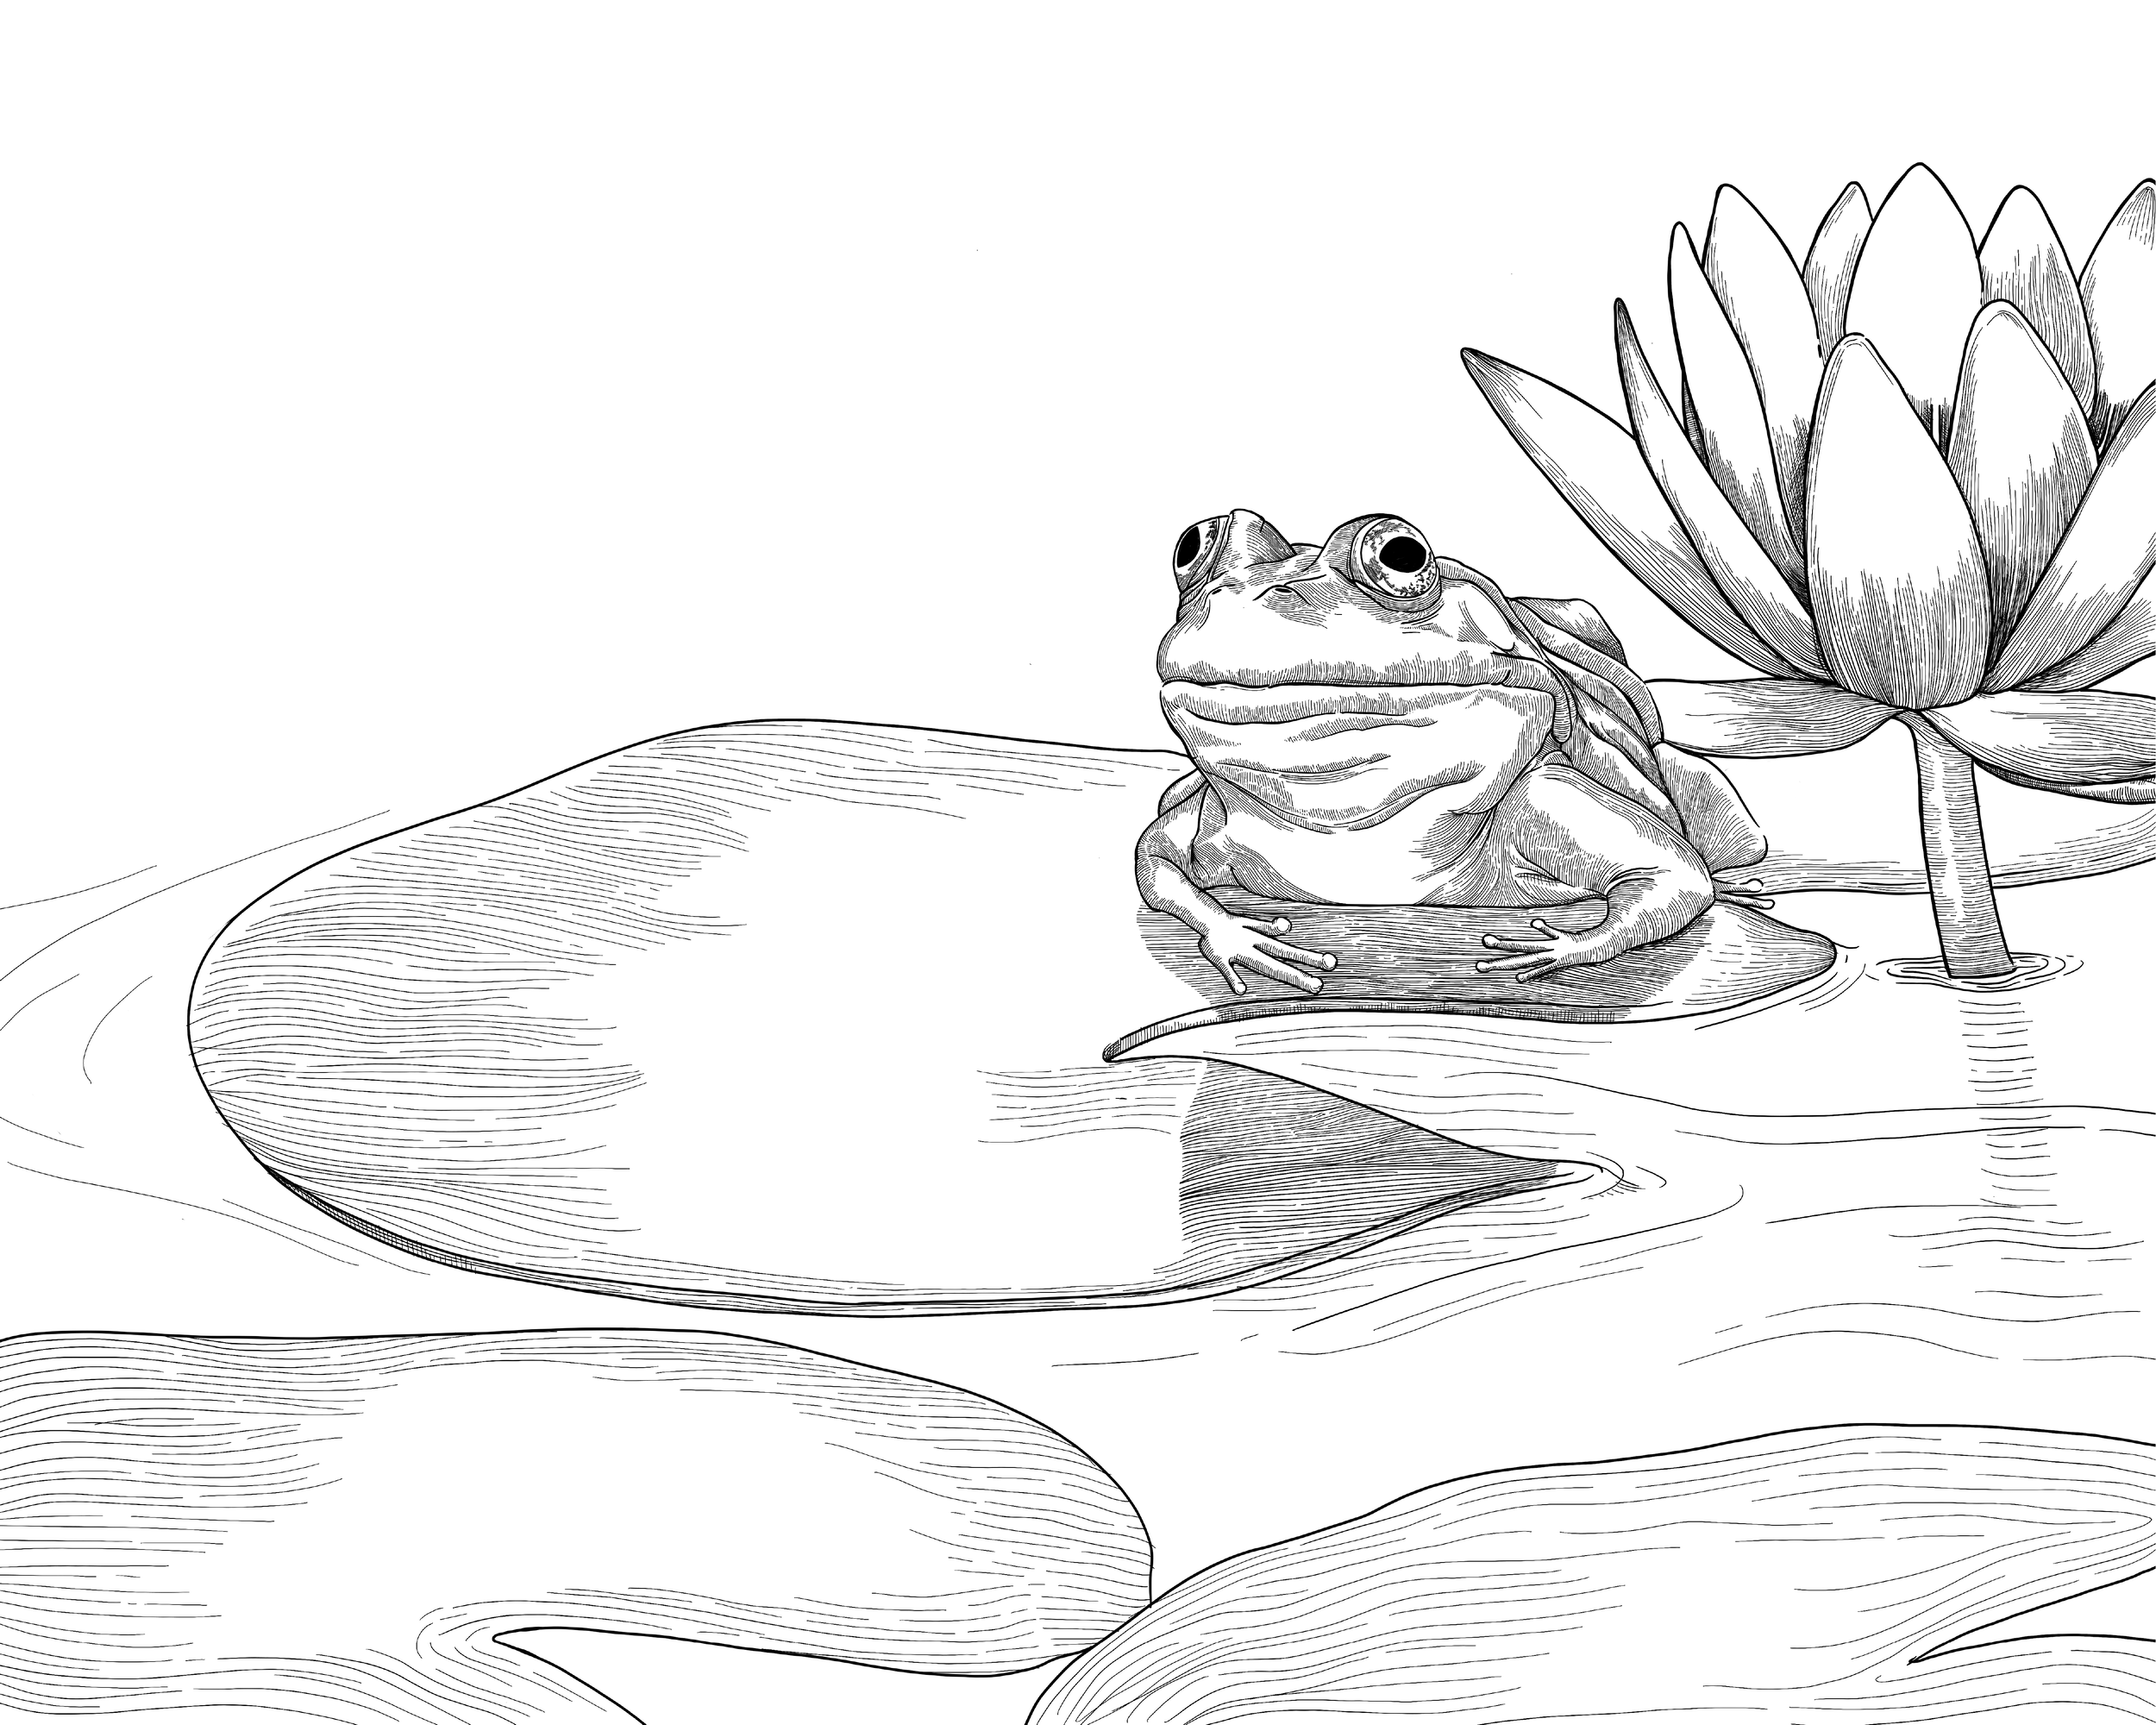 Frog2-01.png